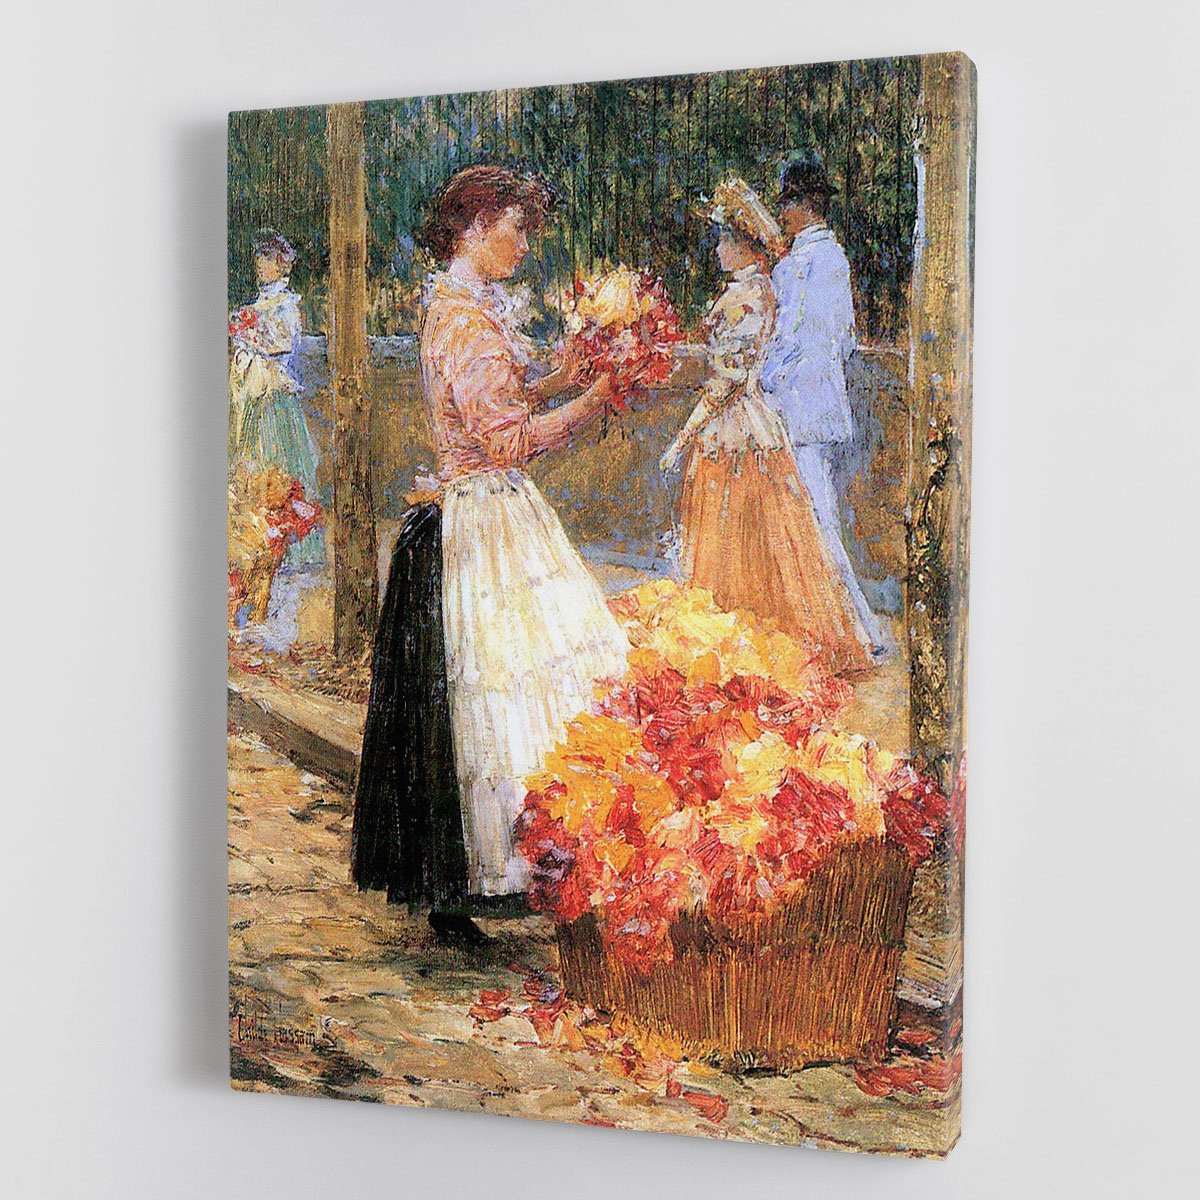 Woman sells flowers by Hassam Canvas Print or Poster